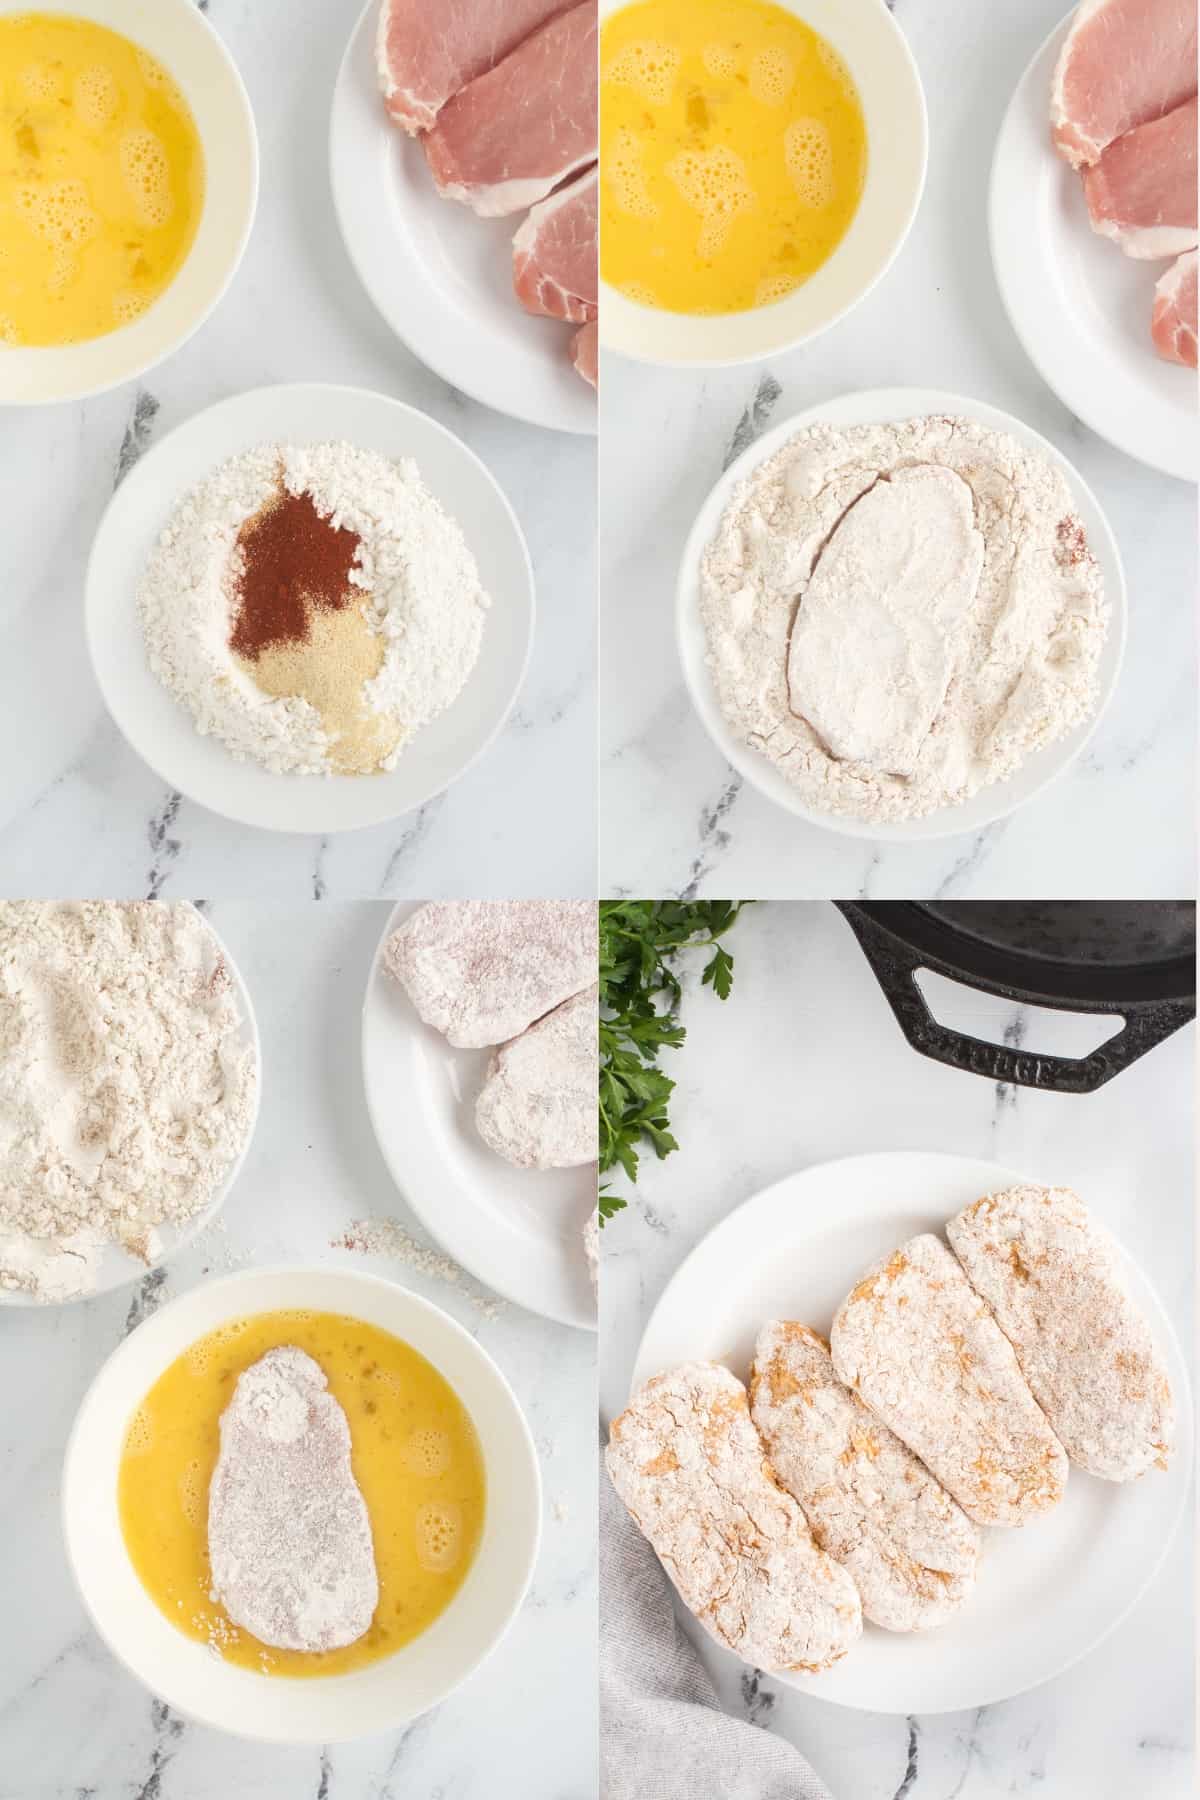 This four-image collage illustrates the process of breading and frying pork chops. It begins with the flour and spice mixture, followed by coating the pork chops. Next, the chops are dipped in beaten eggs before being breaded again. The final image shows the breaded pork chops ready for frying.